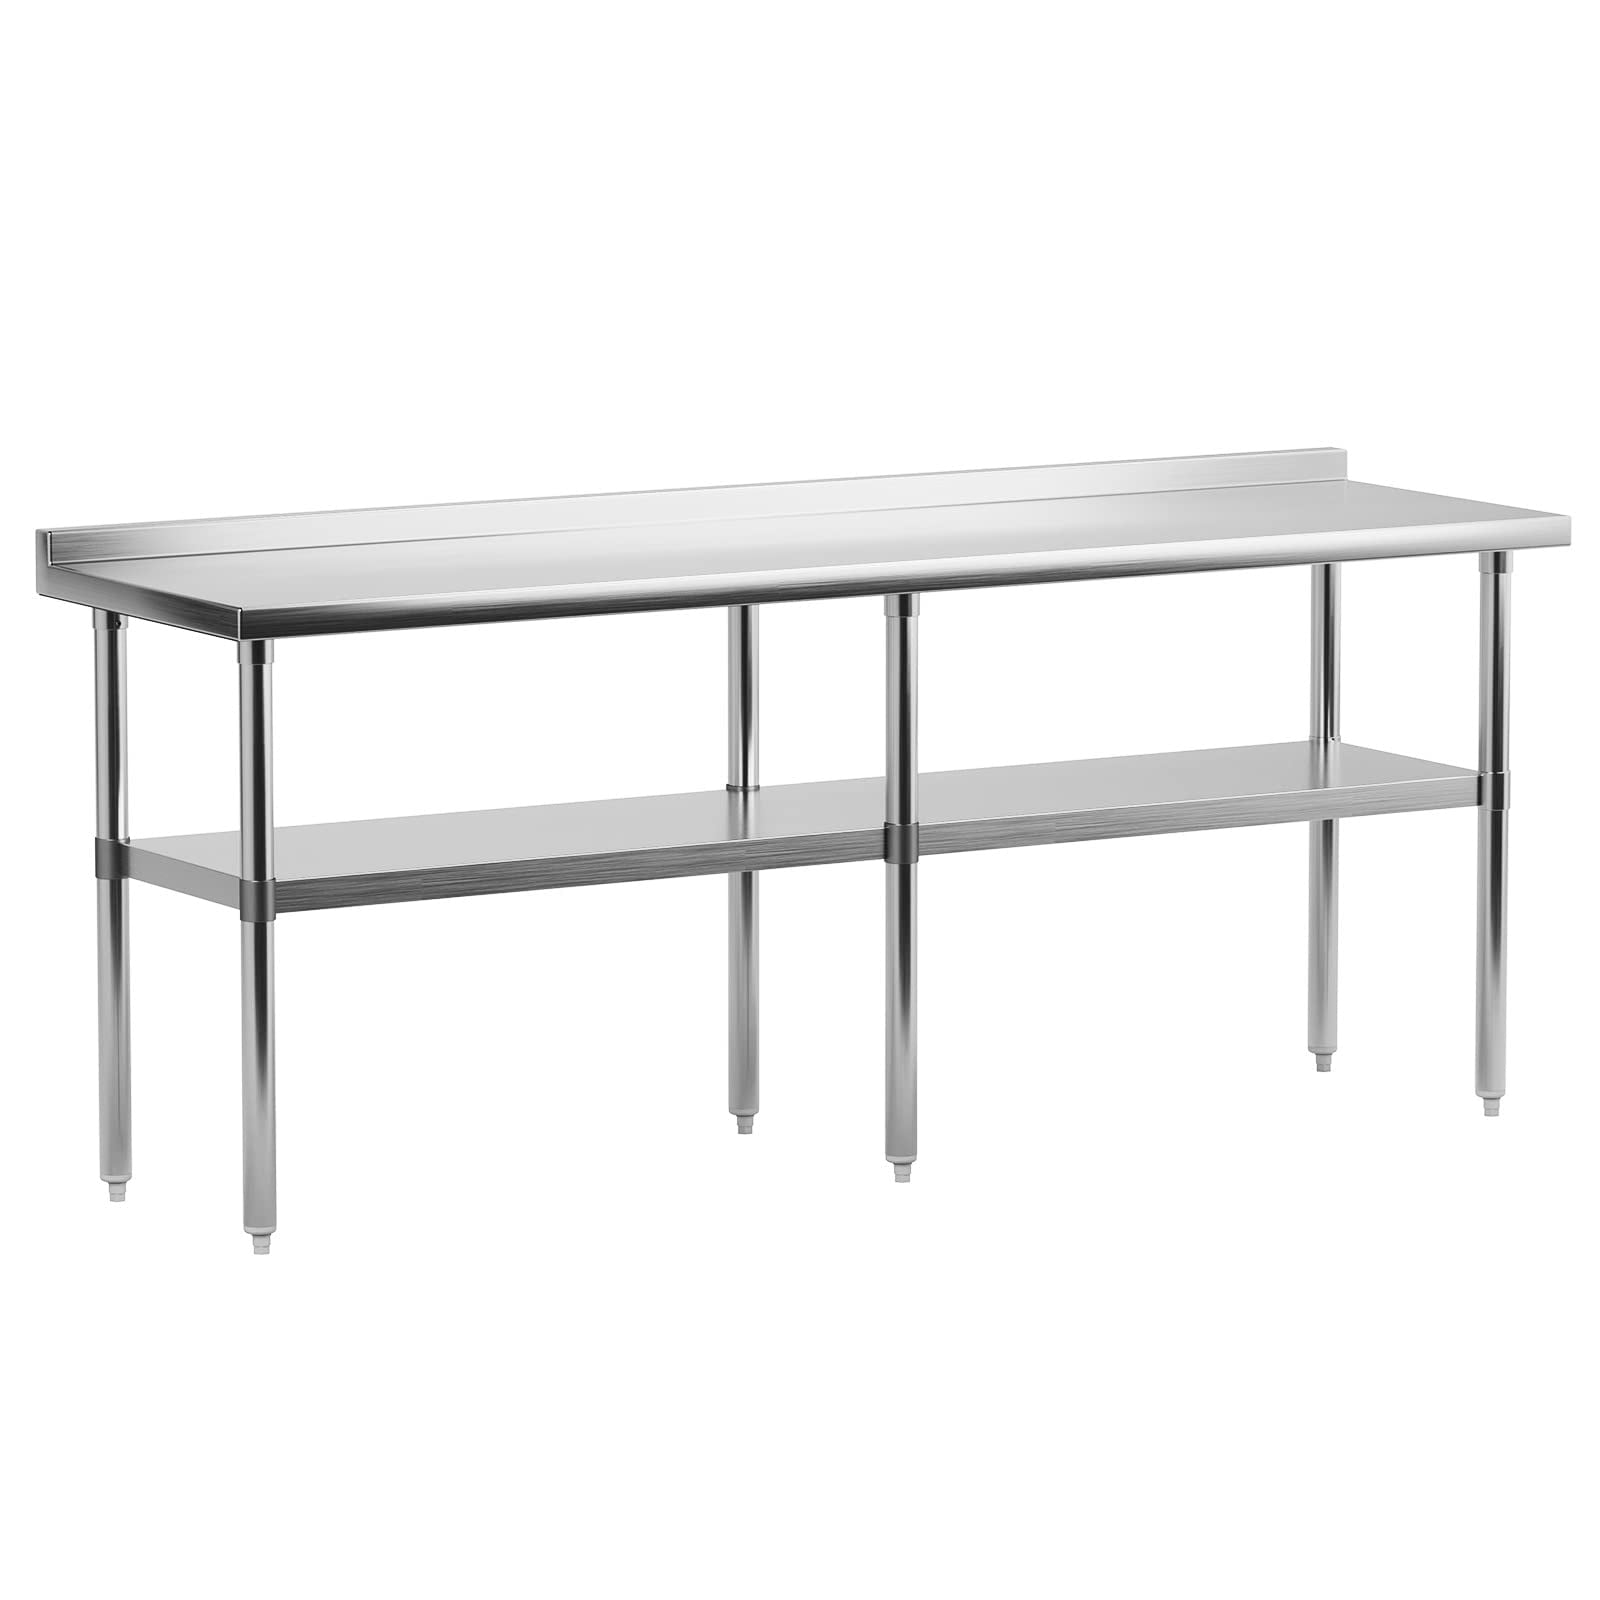 Stainless Steel Table for Prep & Work, Heavy Duty Commercial Kitchen ...